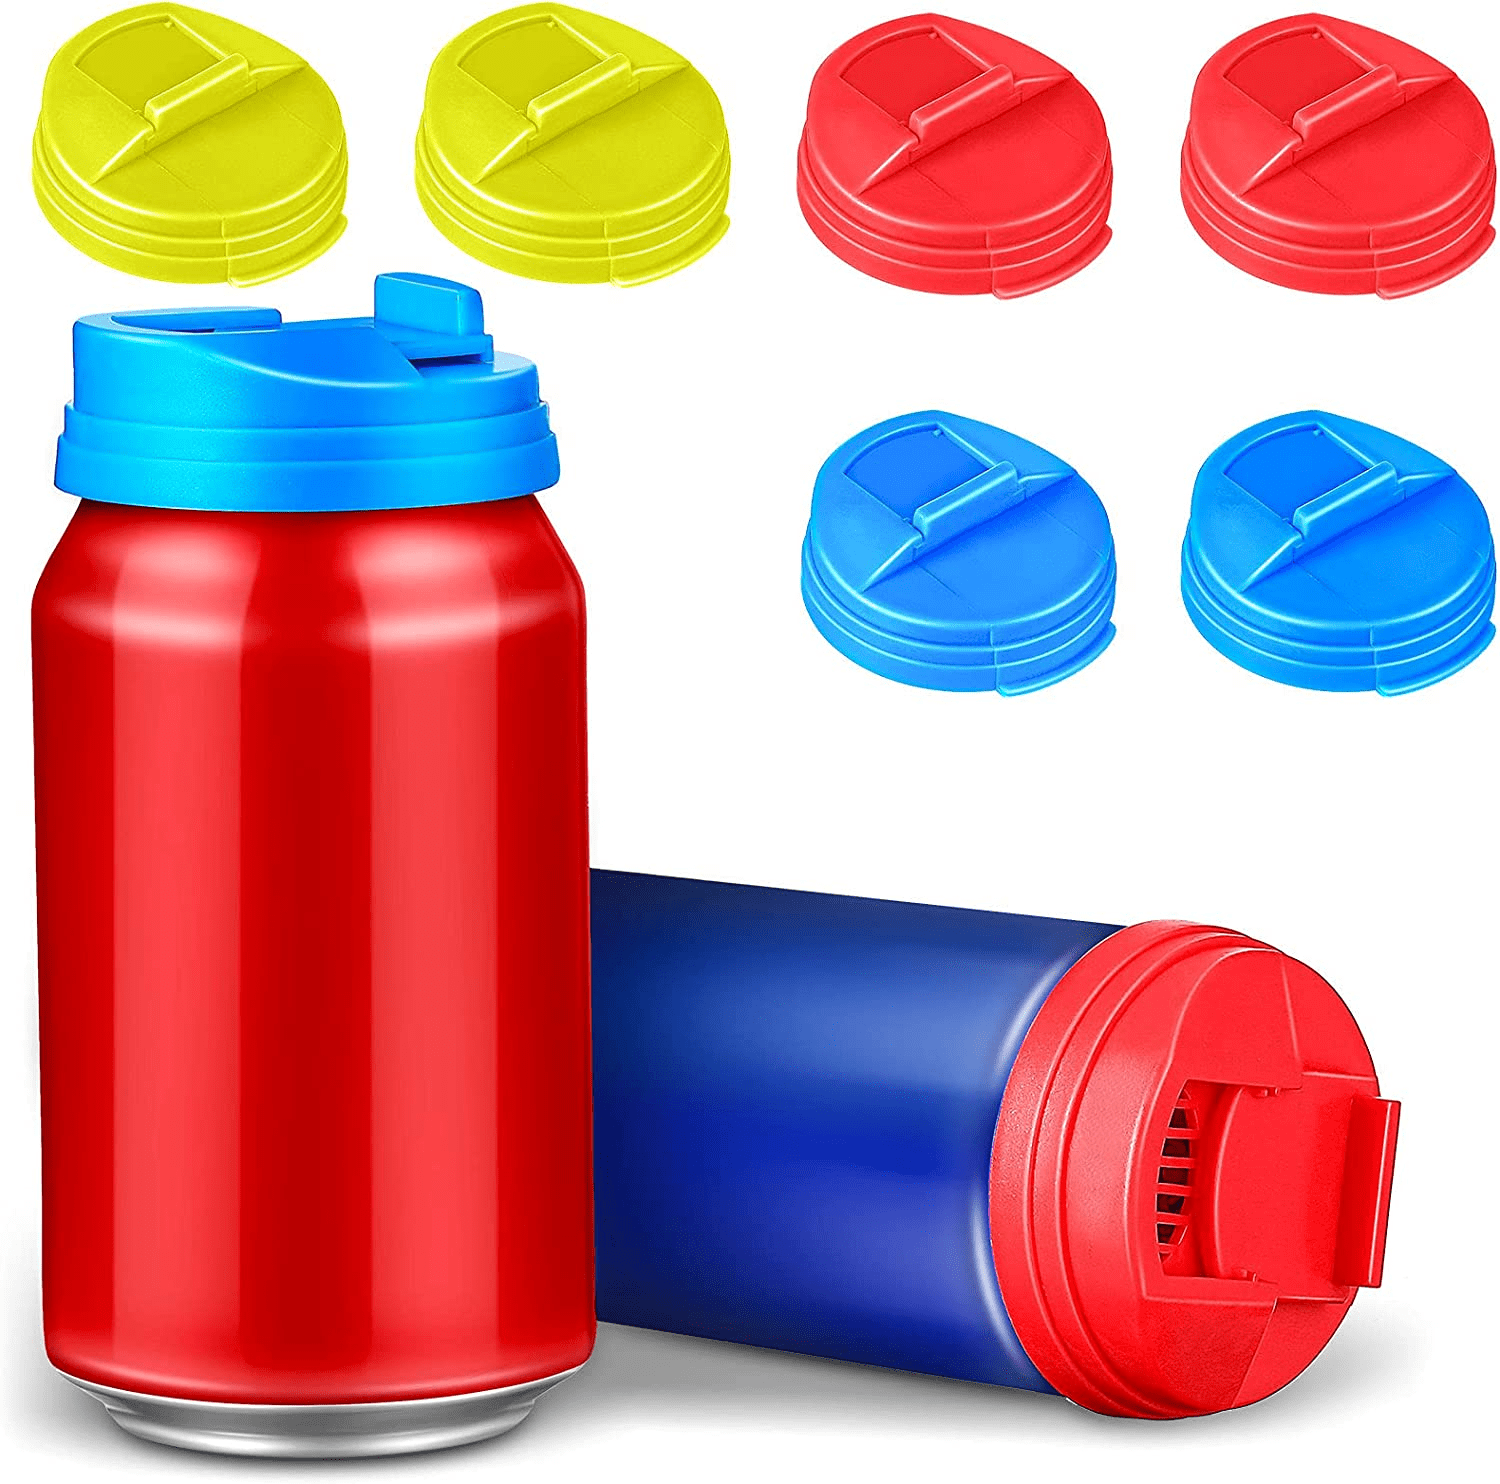 NEW BPA Free Colorful Replacement Plastic Sealing Pp Acrylic Lid For 16oz  Glass Can Material Spill Proof Splash Resistant Cover For Straight Cup From  Wingarden, $0.63